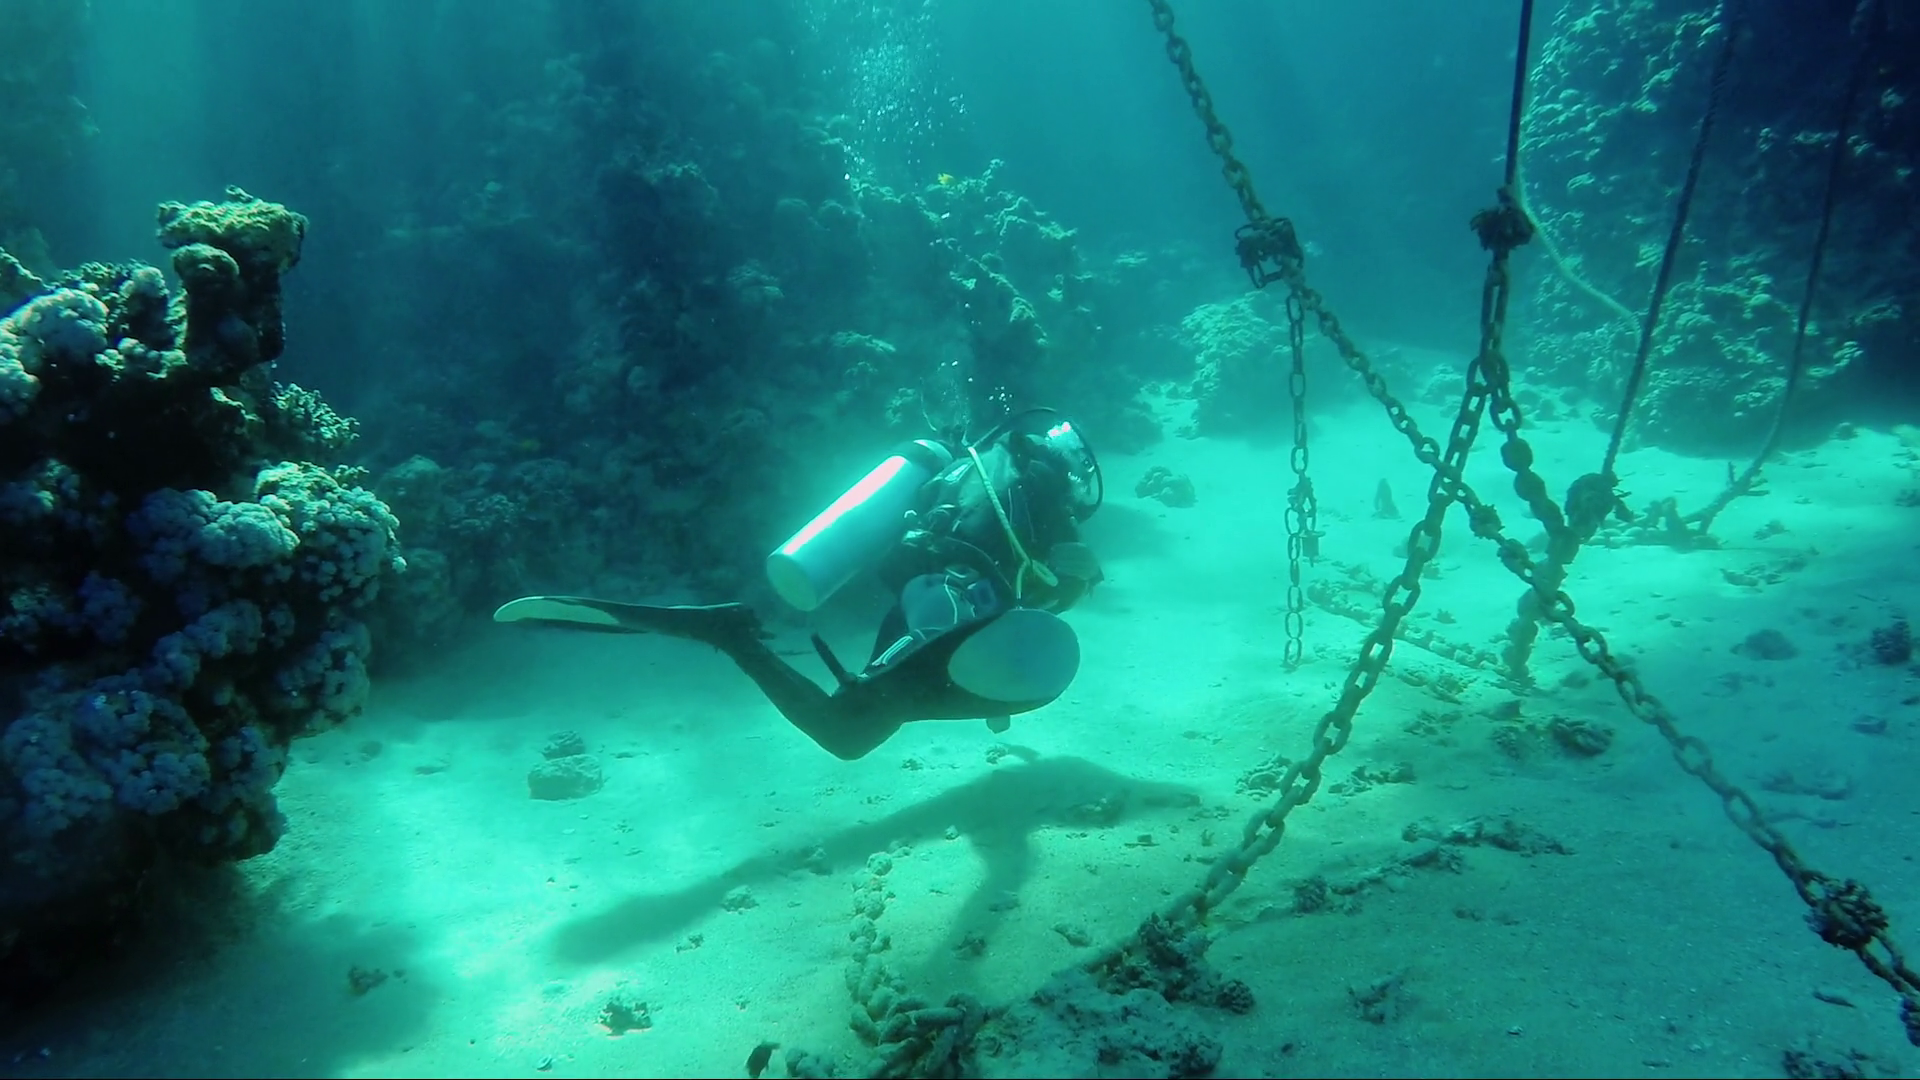 Diver underwater swims near the anchor chains in the sun. A ...